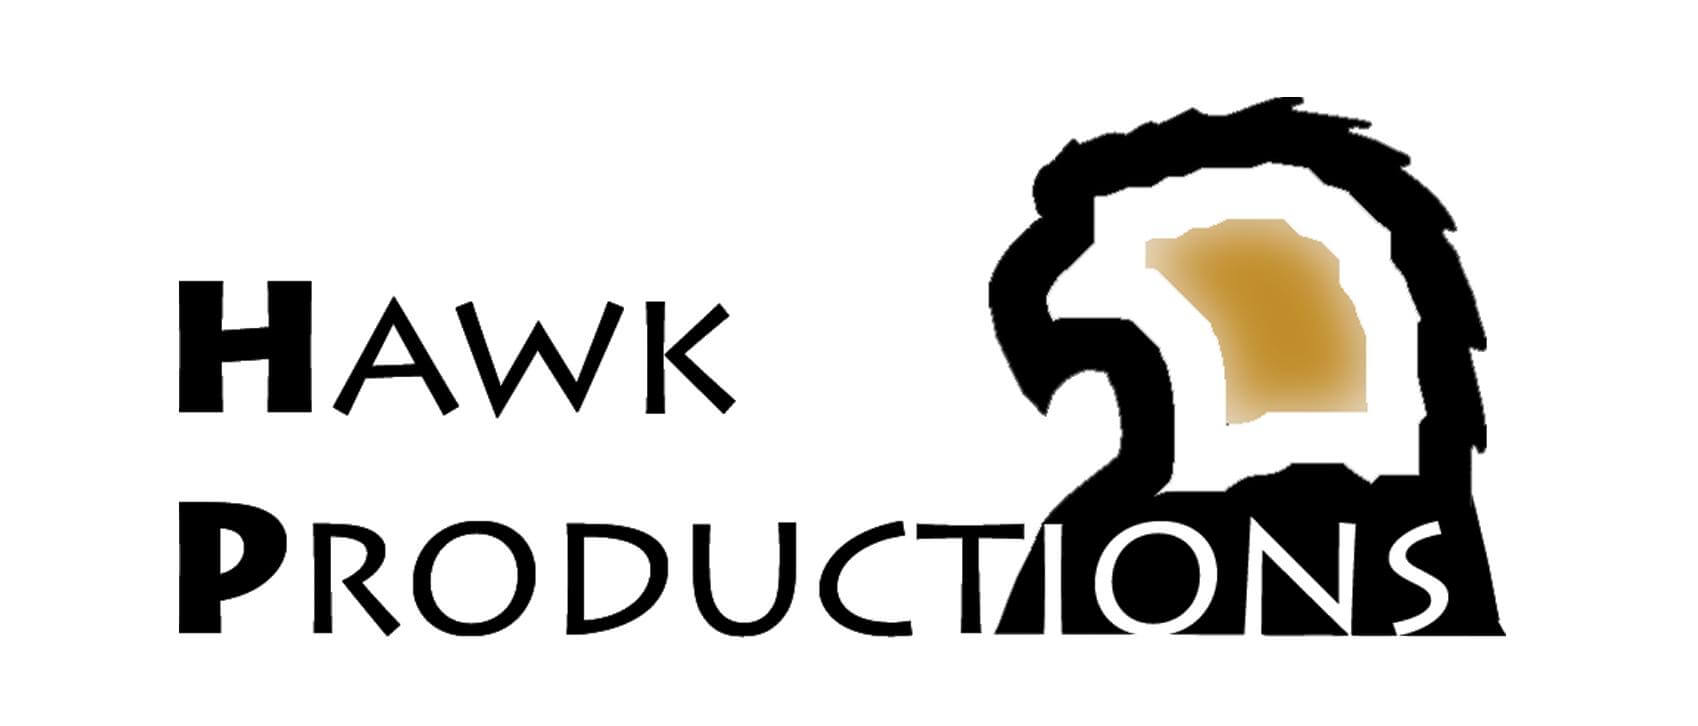 Hawk Productions Club: Producing the Woods